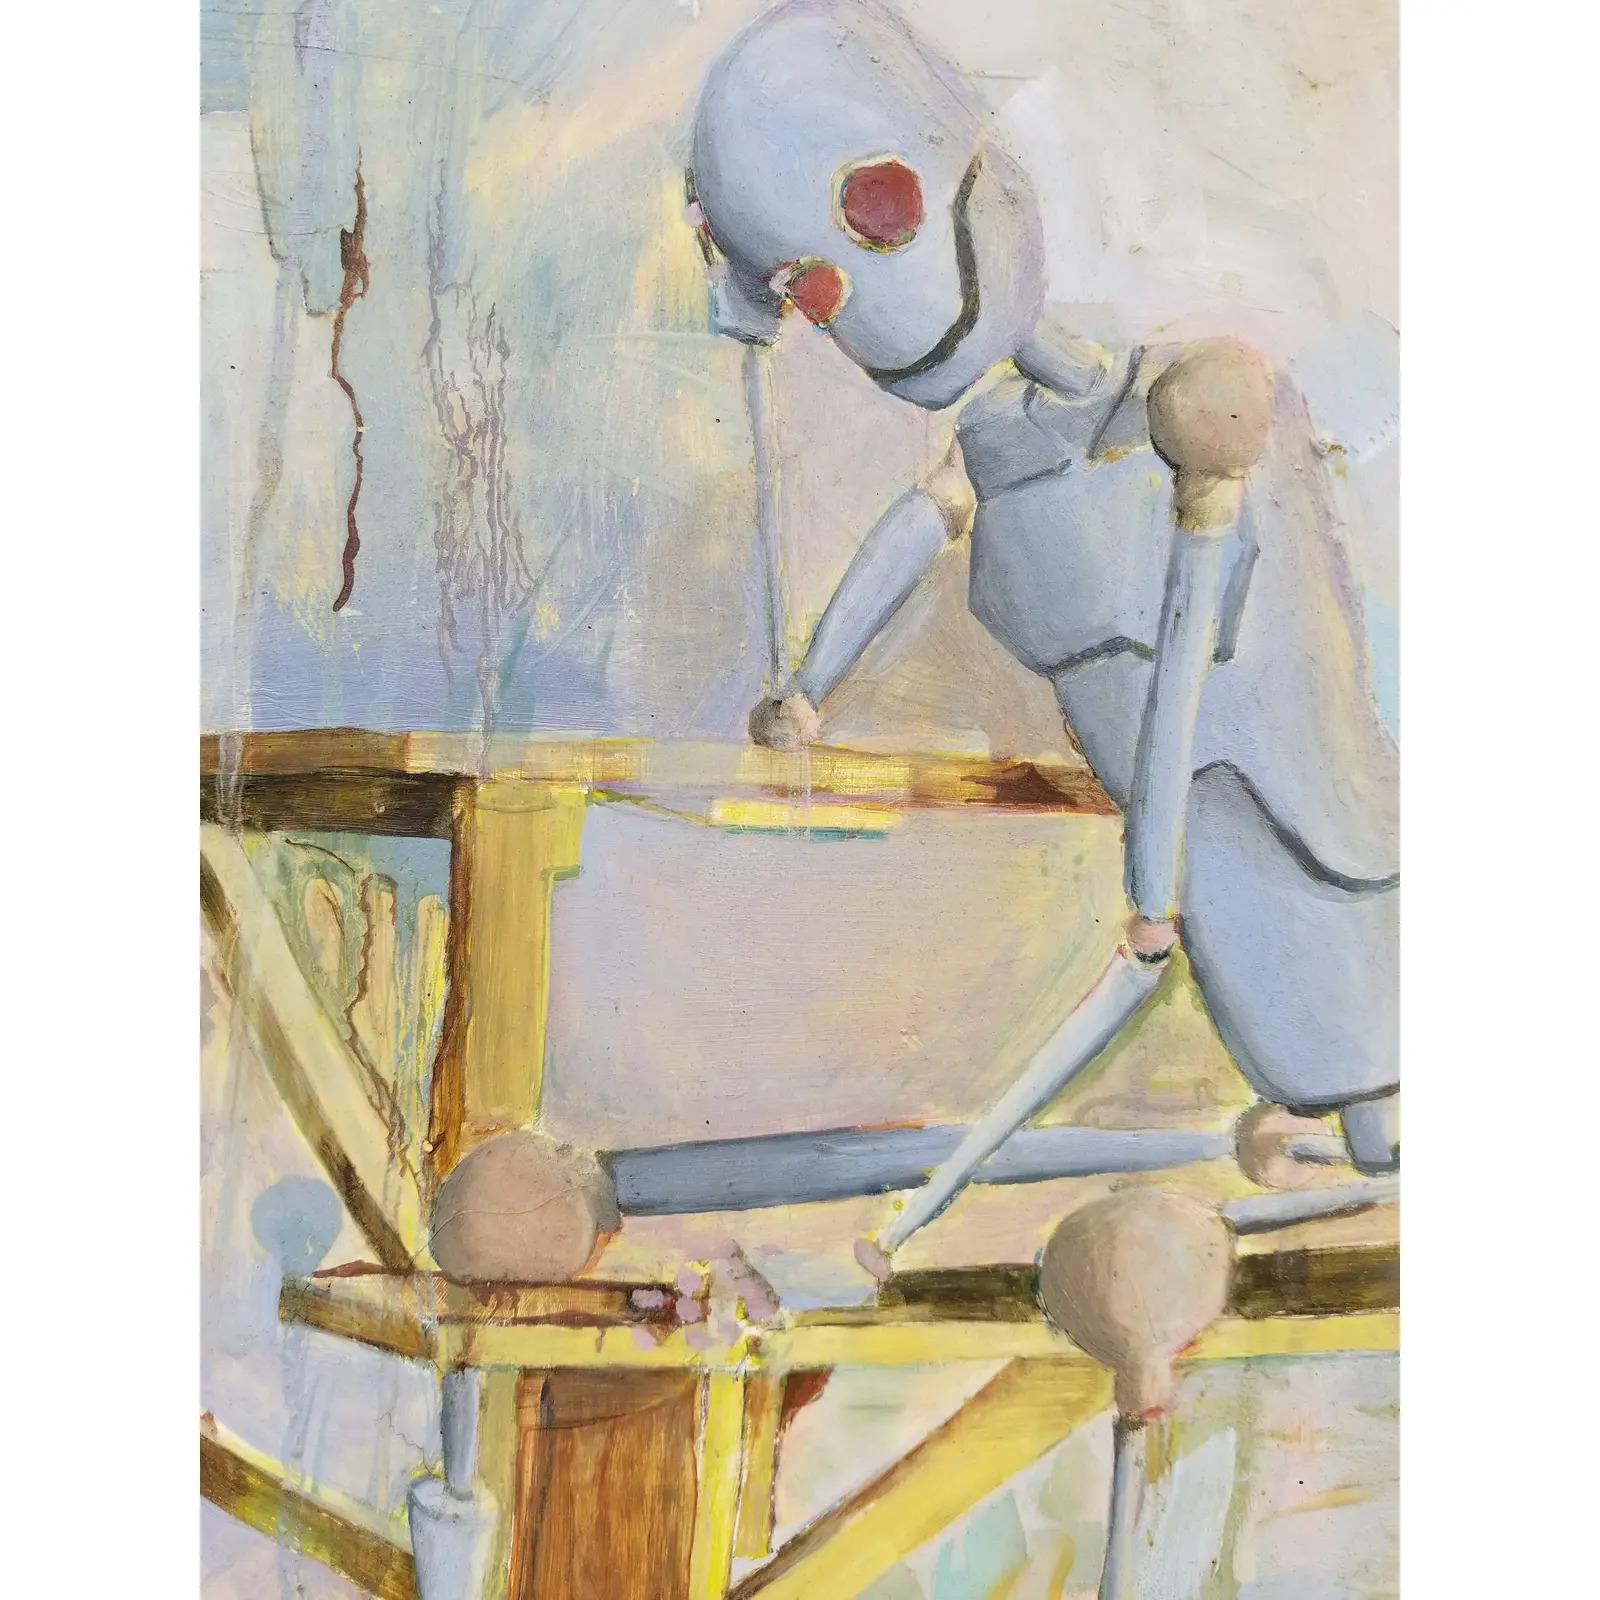 Original robot painting by California Artist Adam Beck. Interesting subject matter with contrasting futuristic robot working on Primitive work table and bench. Painted on wood board. Unsigned.